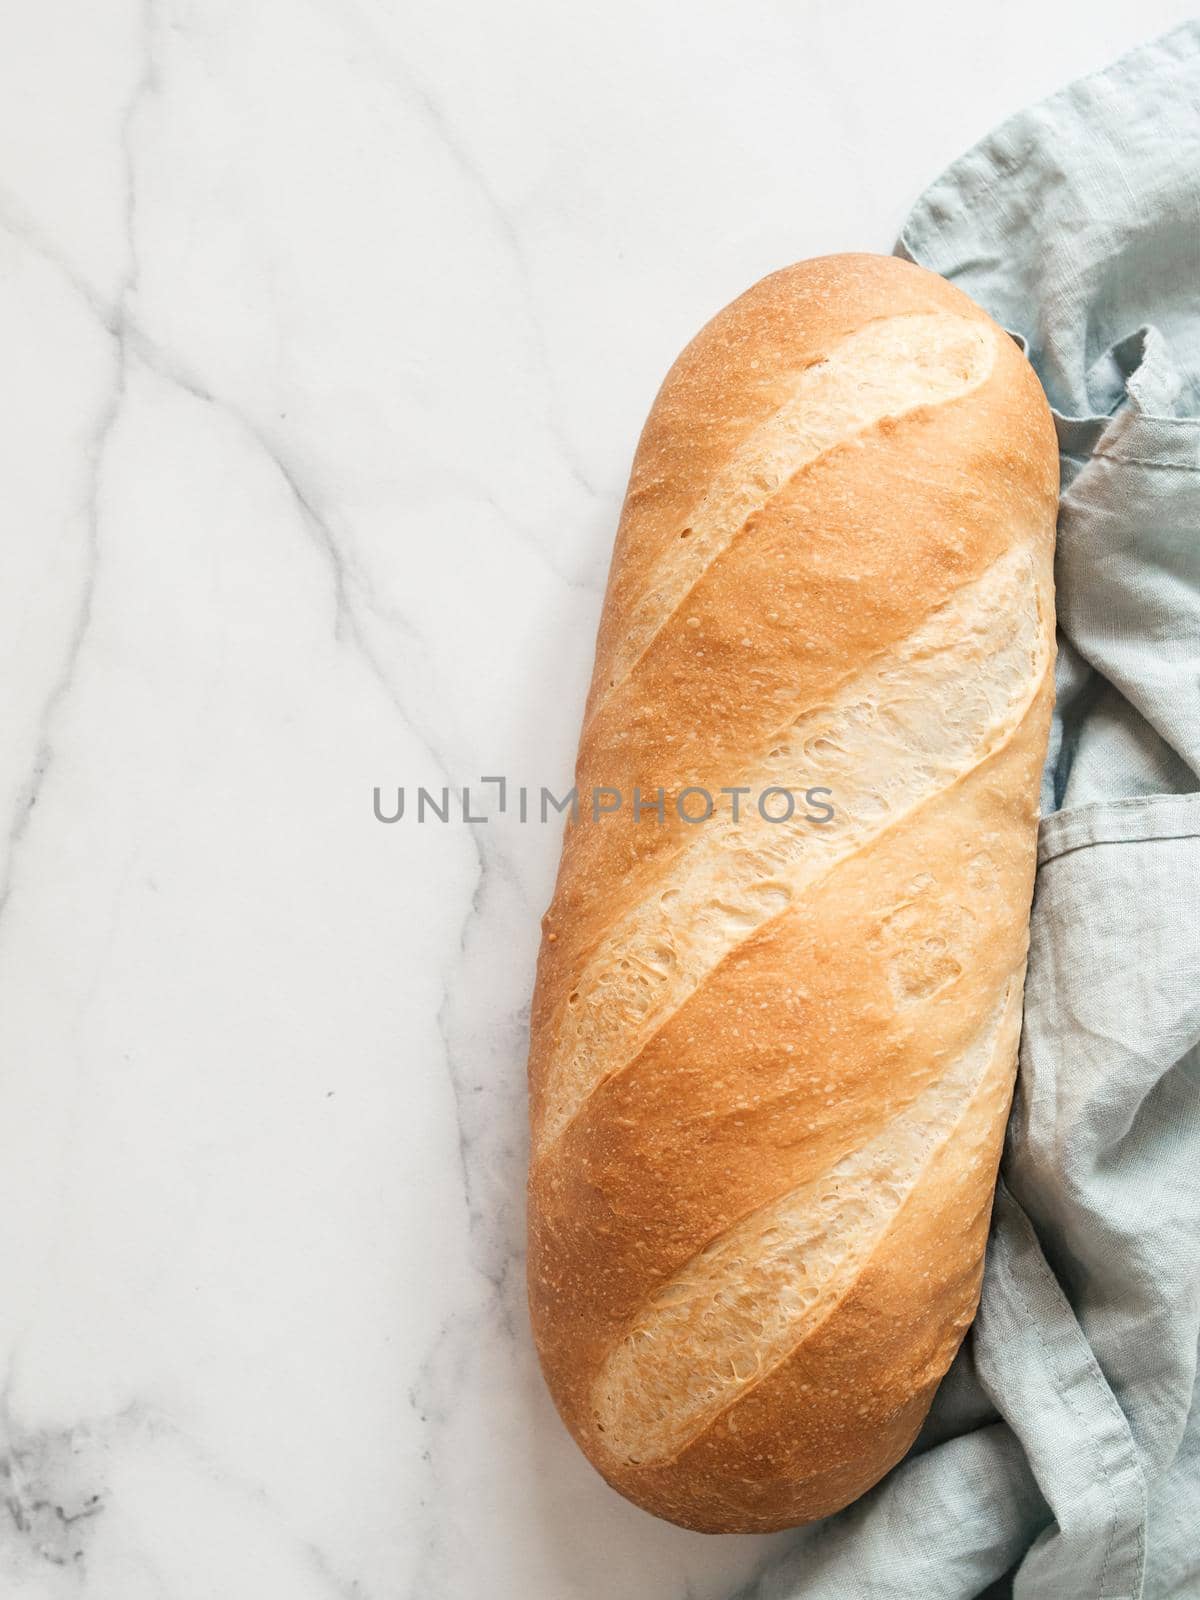 British White Bloomer or European Baton loaf bread on white marble background. Top view or flat lay. Copy space for text or design. Vertical.